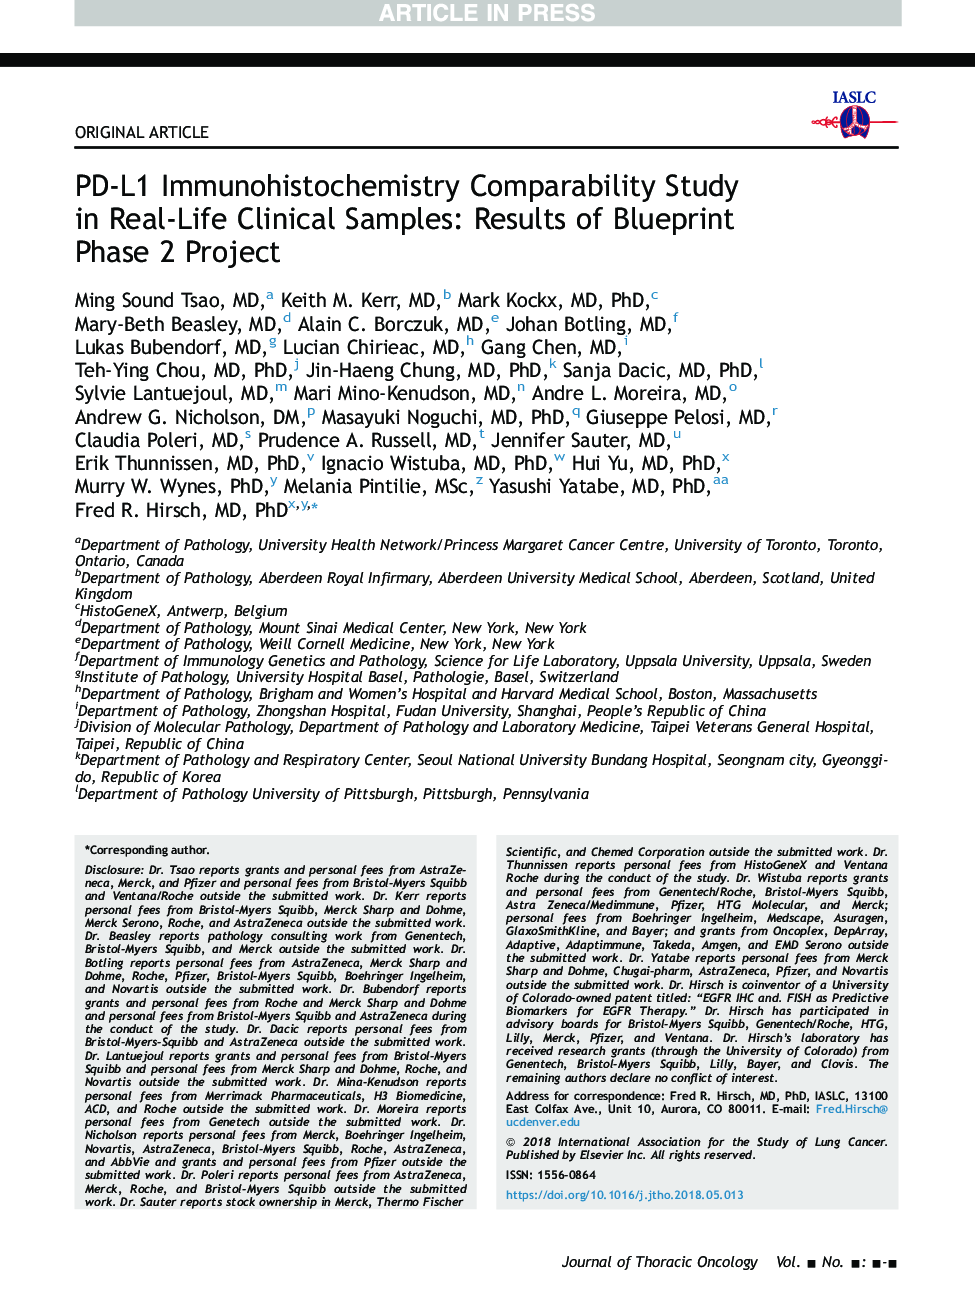 PD-L1 Immunohistochemistry Comparability Study in Real-Life Clinical Samples: Results of Blueprint Phase 2 Project